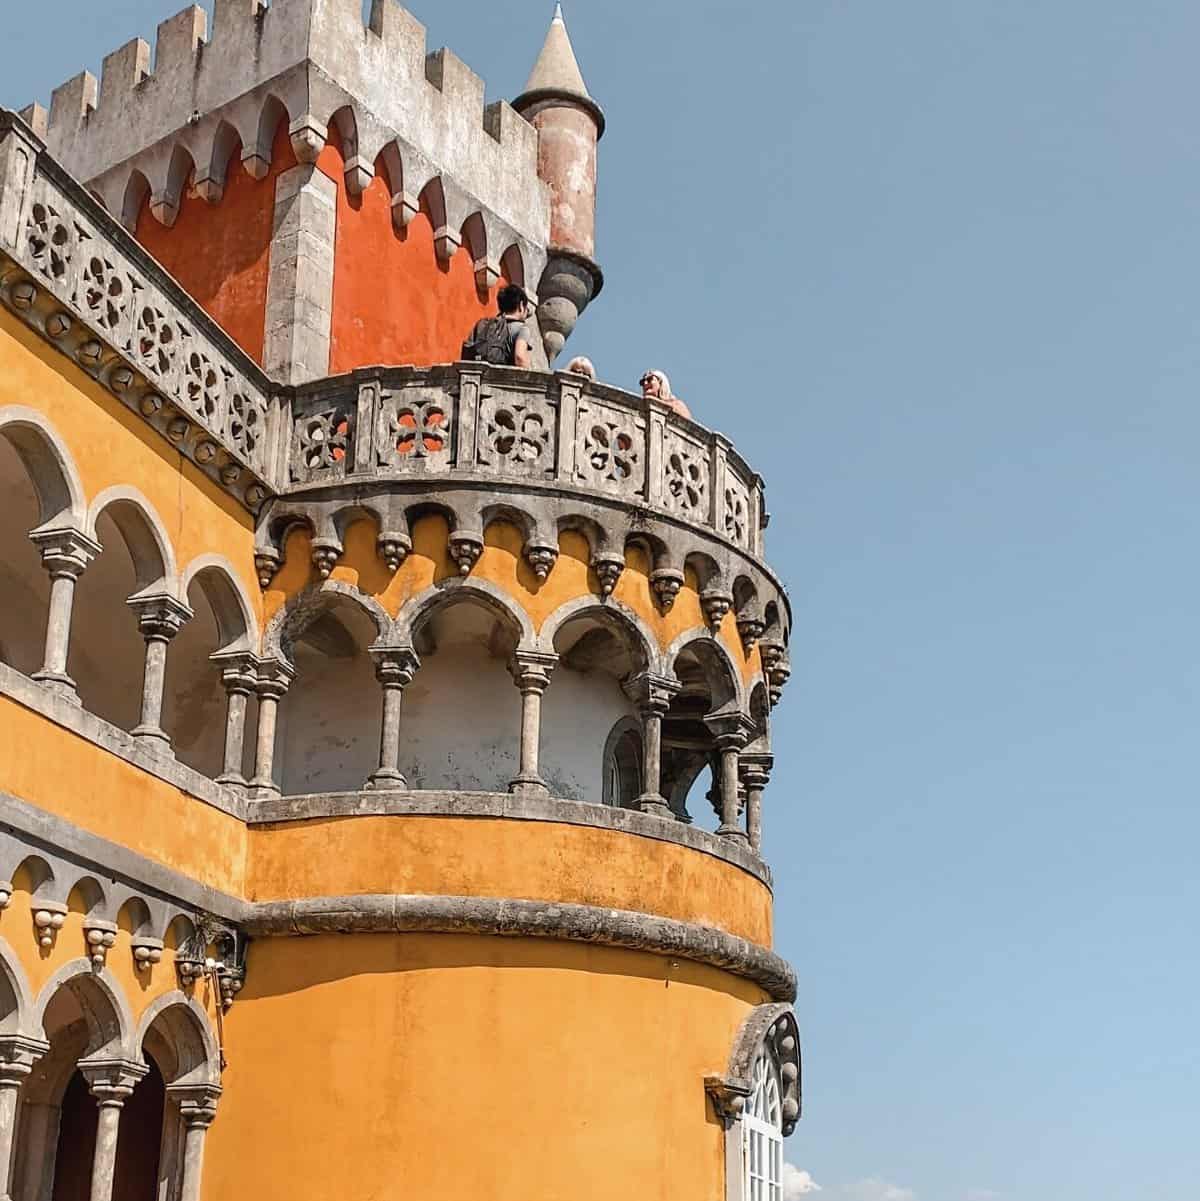 Yellow and red exterior of Pena Palace.